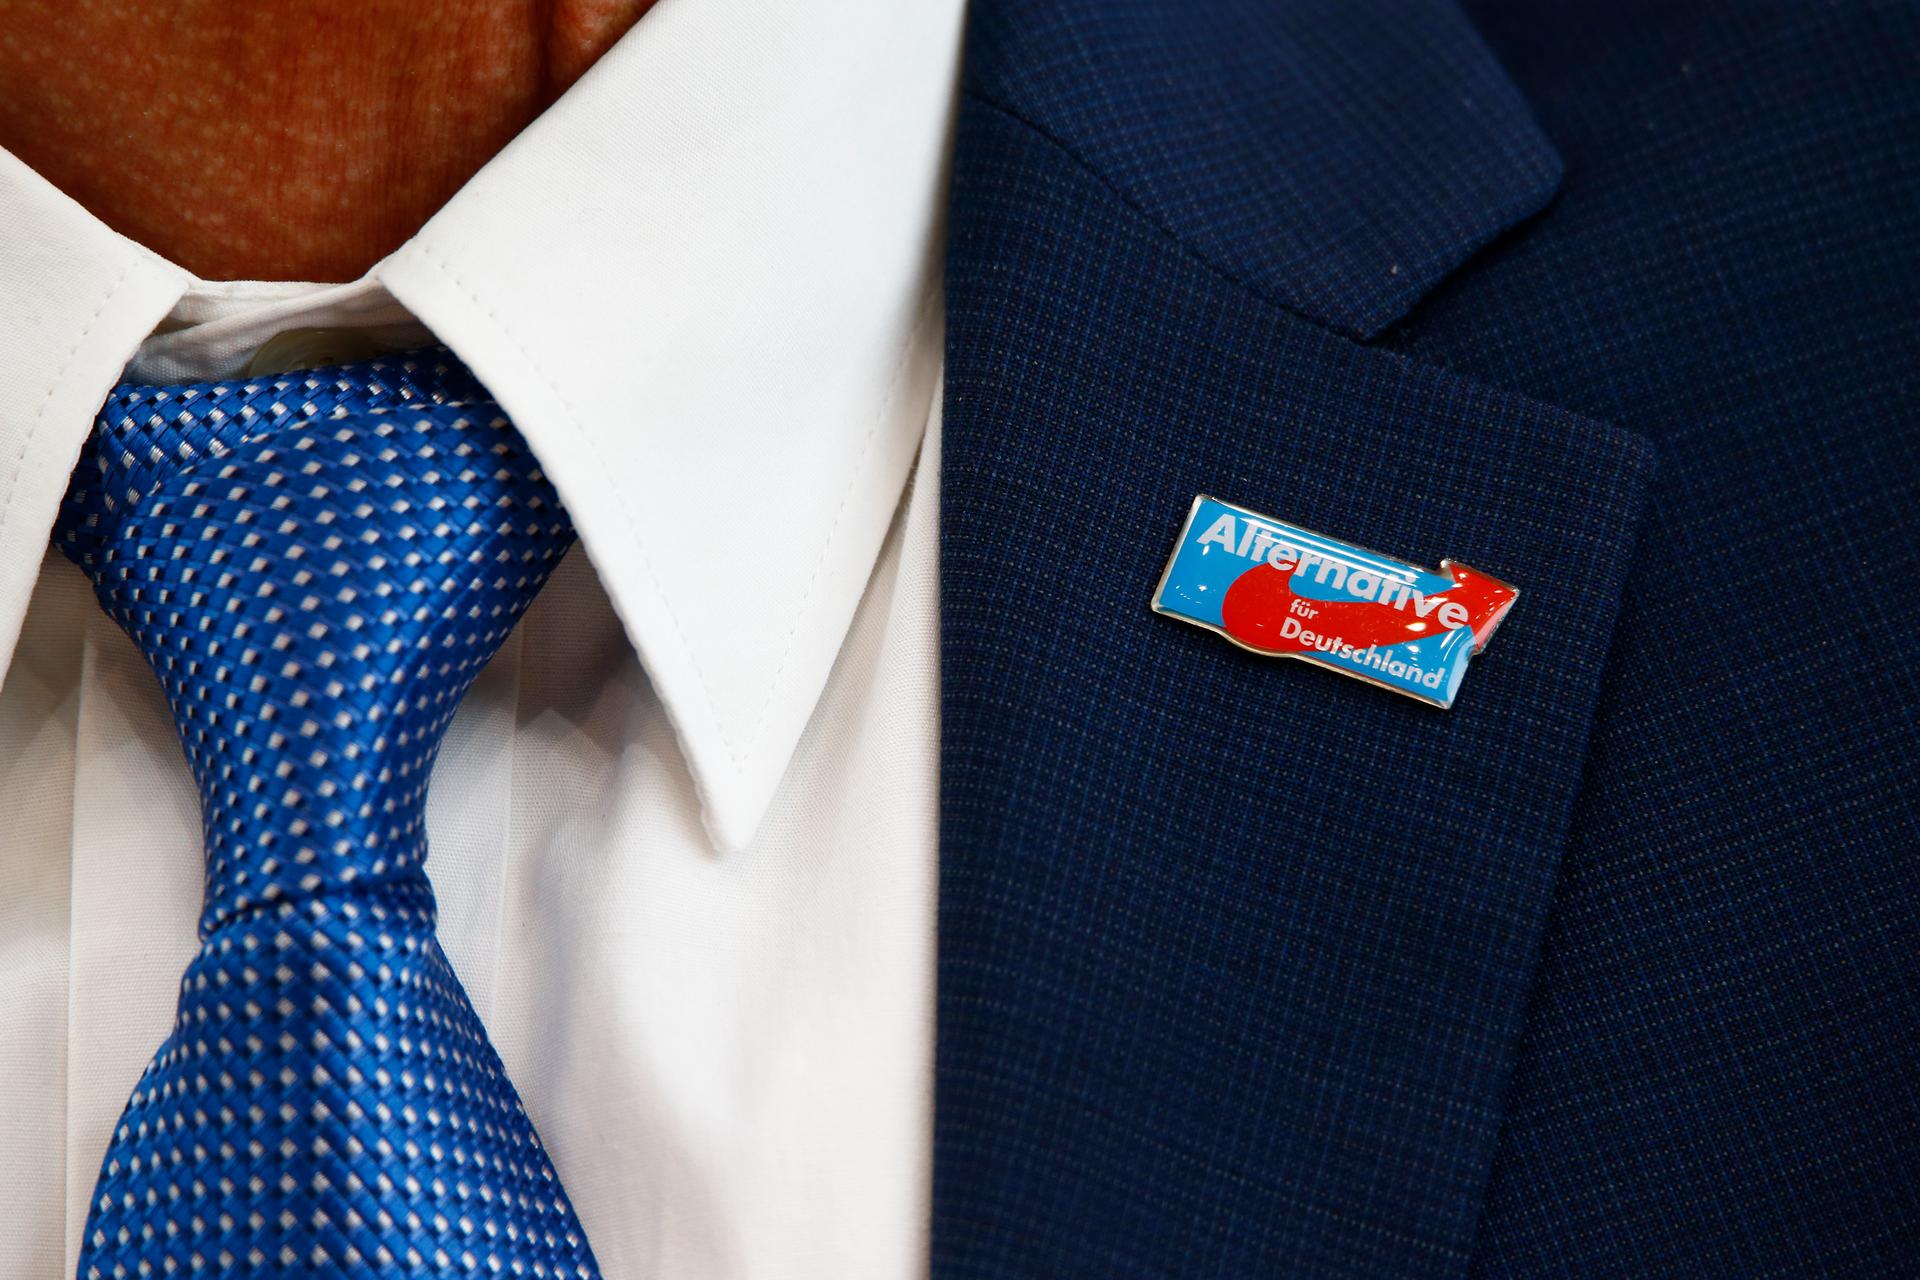 A badge of AfD is seen on the jacket of Uwe Junge, candidate of the anti-immigration party Alternative for Germany in Rhineland-Palatinate at a news conference in Berlin, Germany, March 14, 2016.